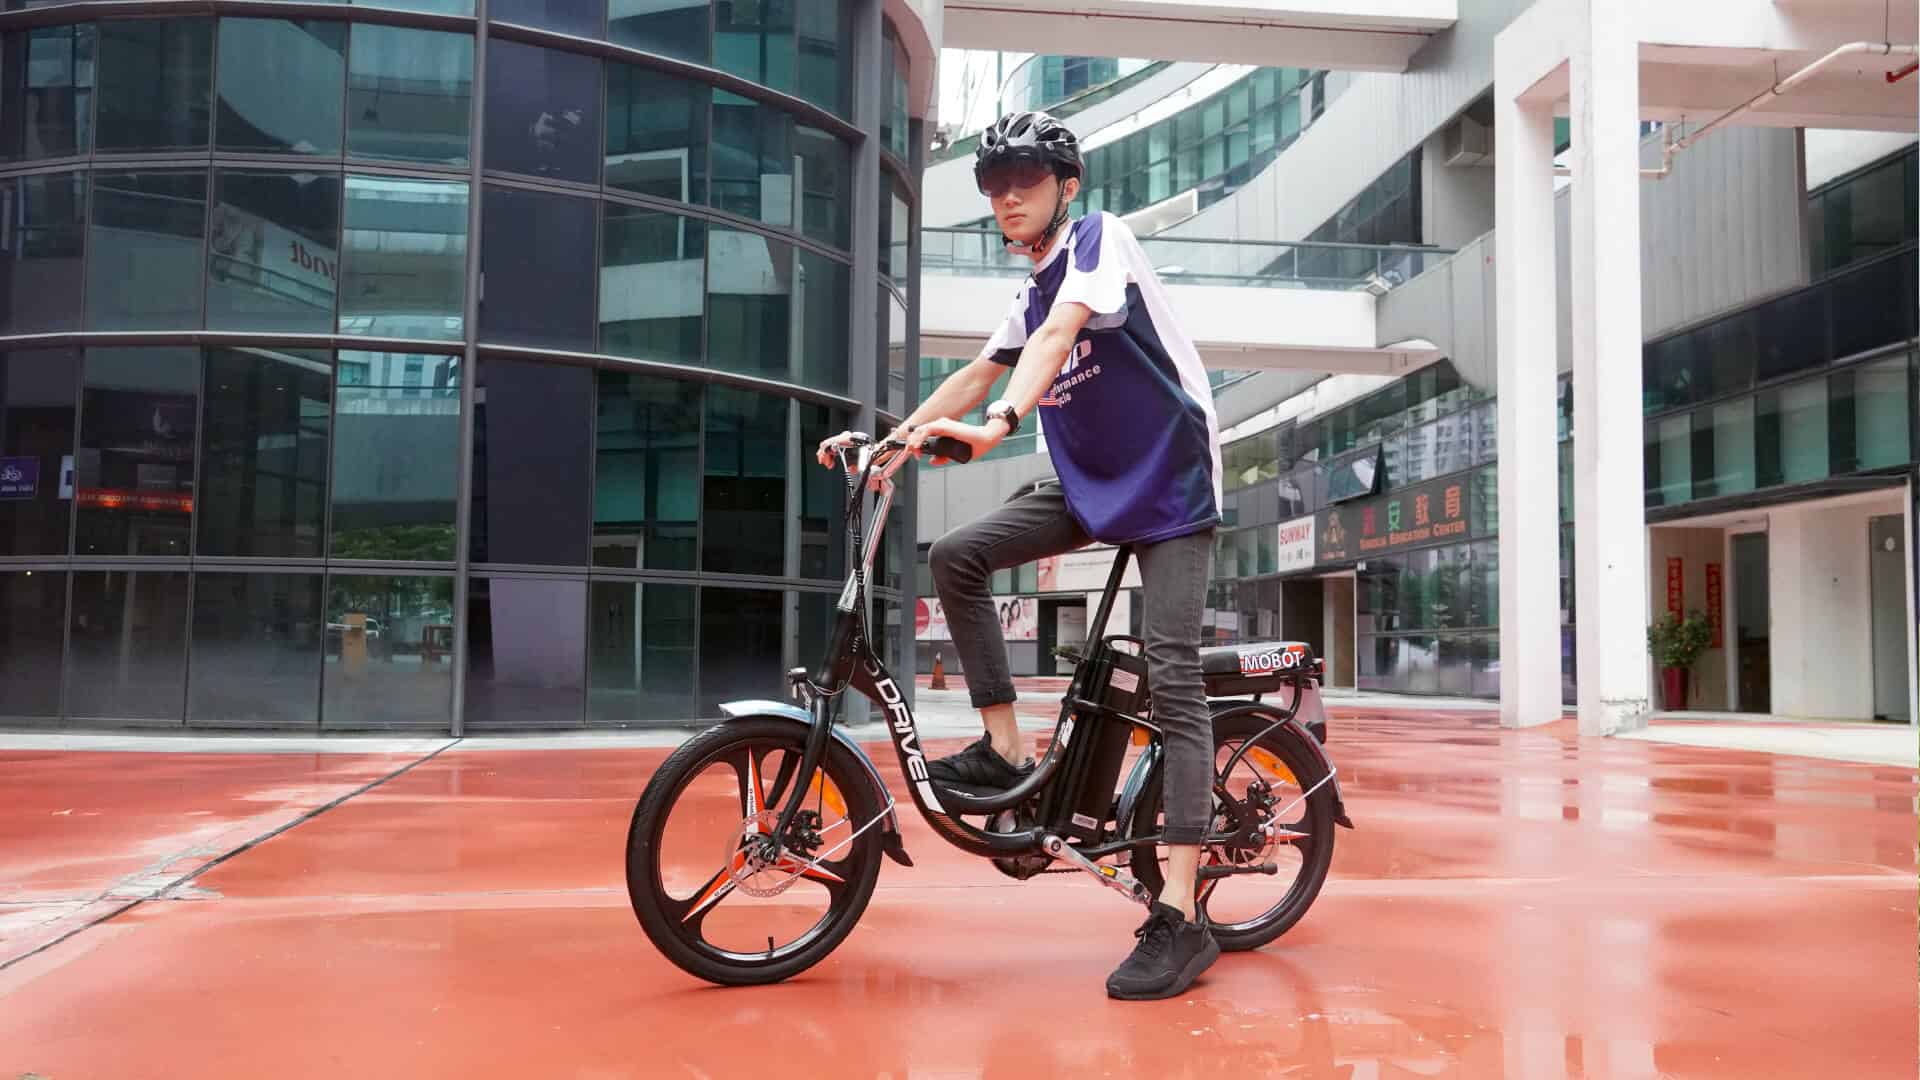 ECO DRIVE (BLACK) LTA approved electric bicycle at Oxley Bizhub 1 (2)